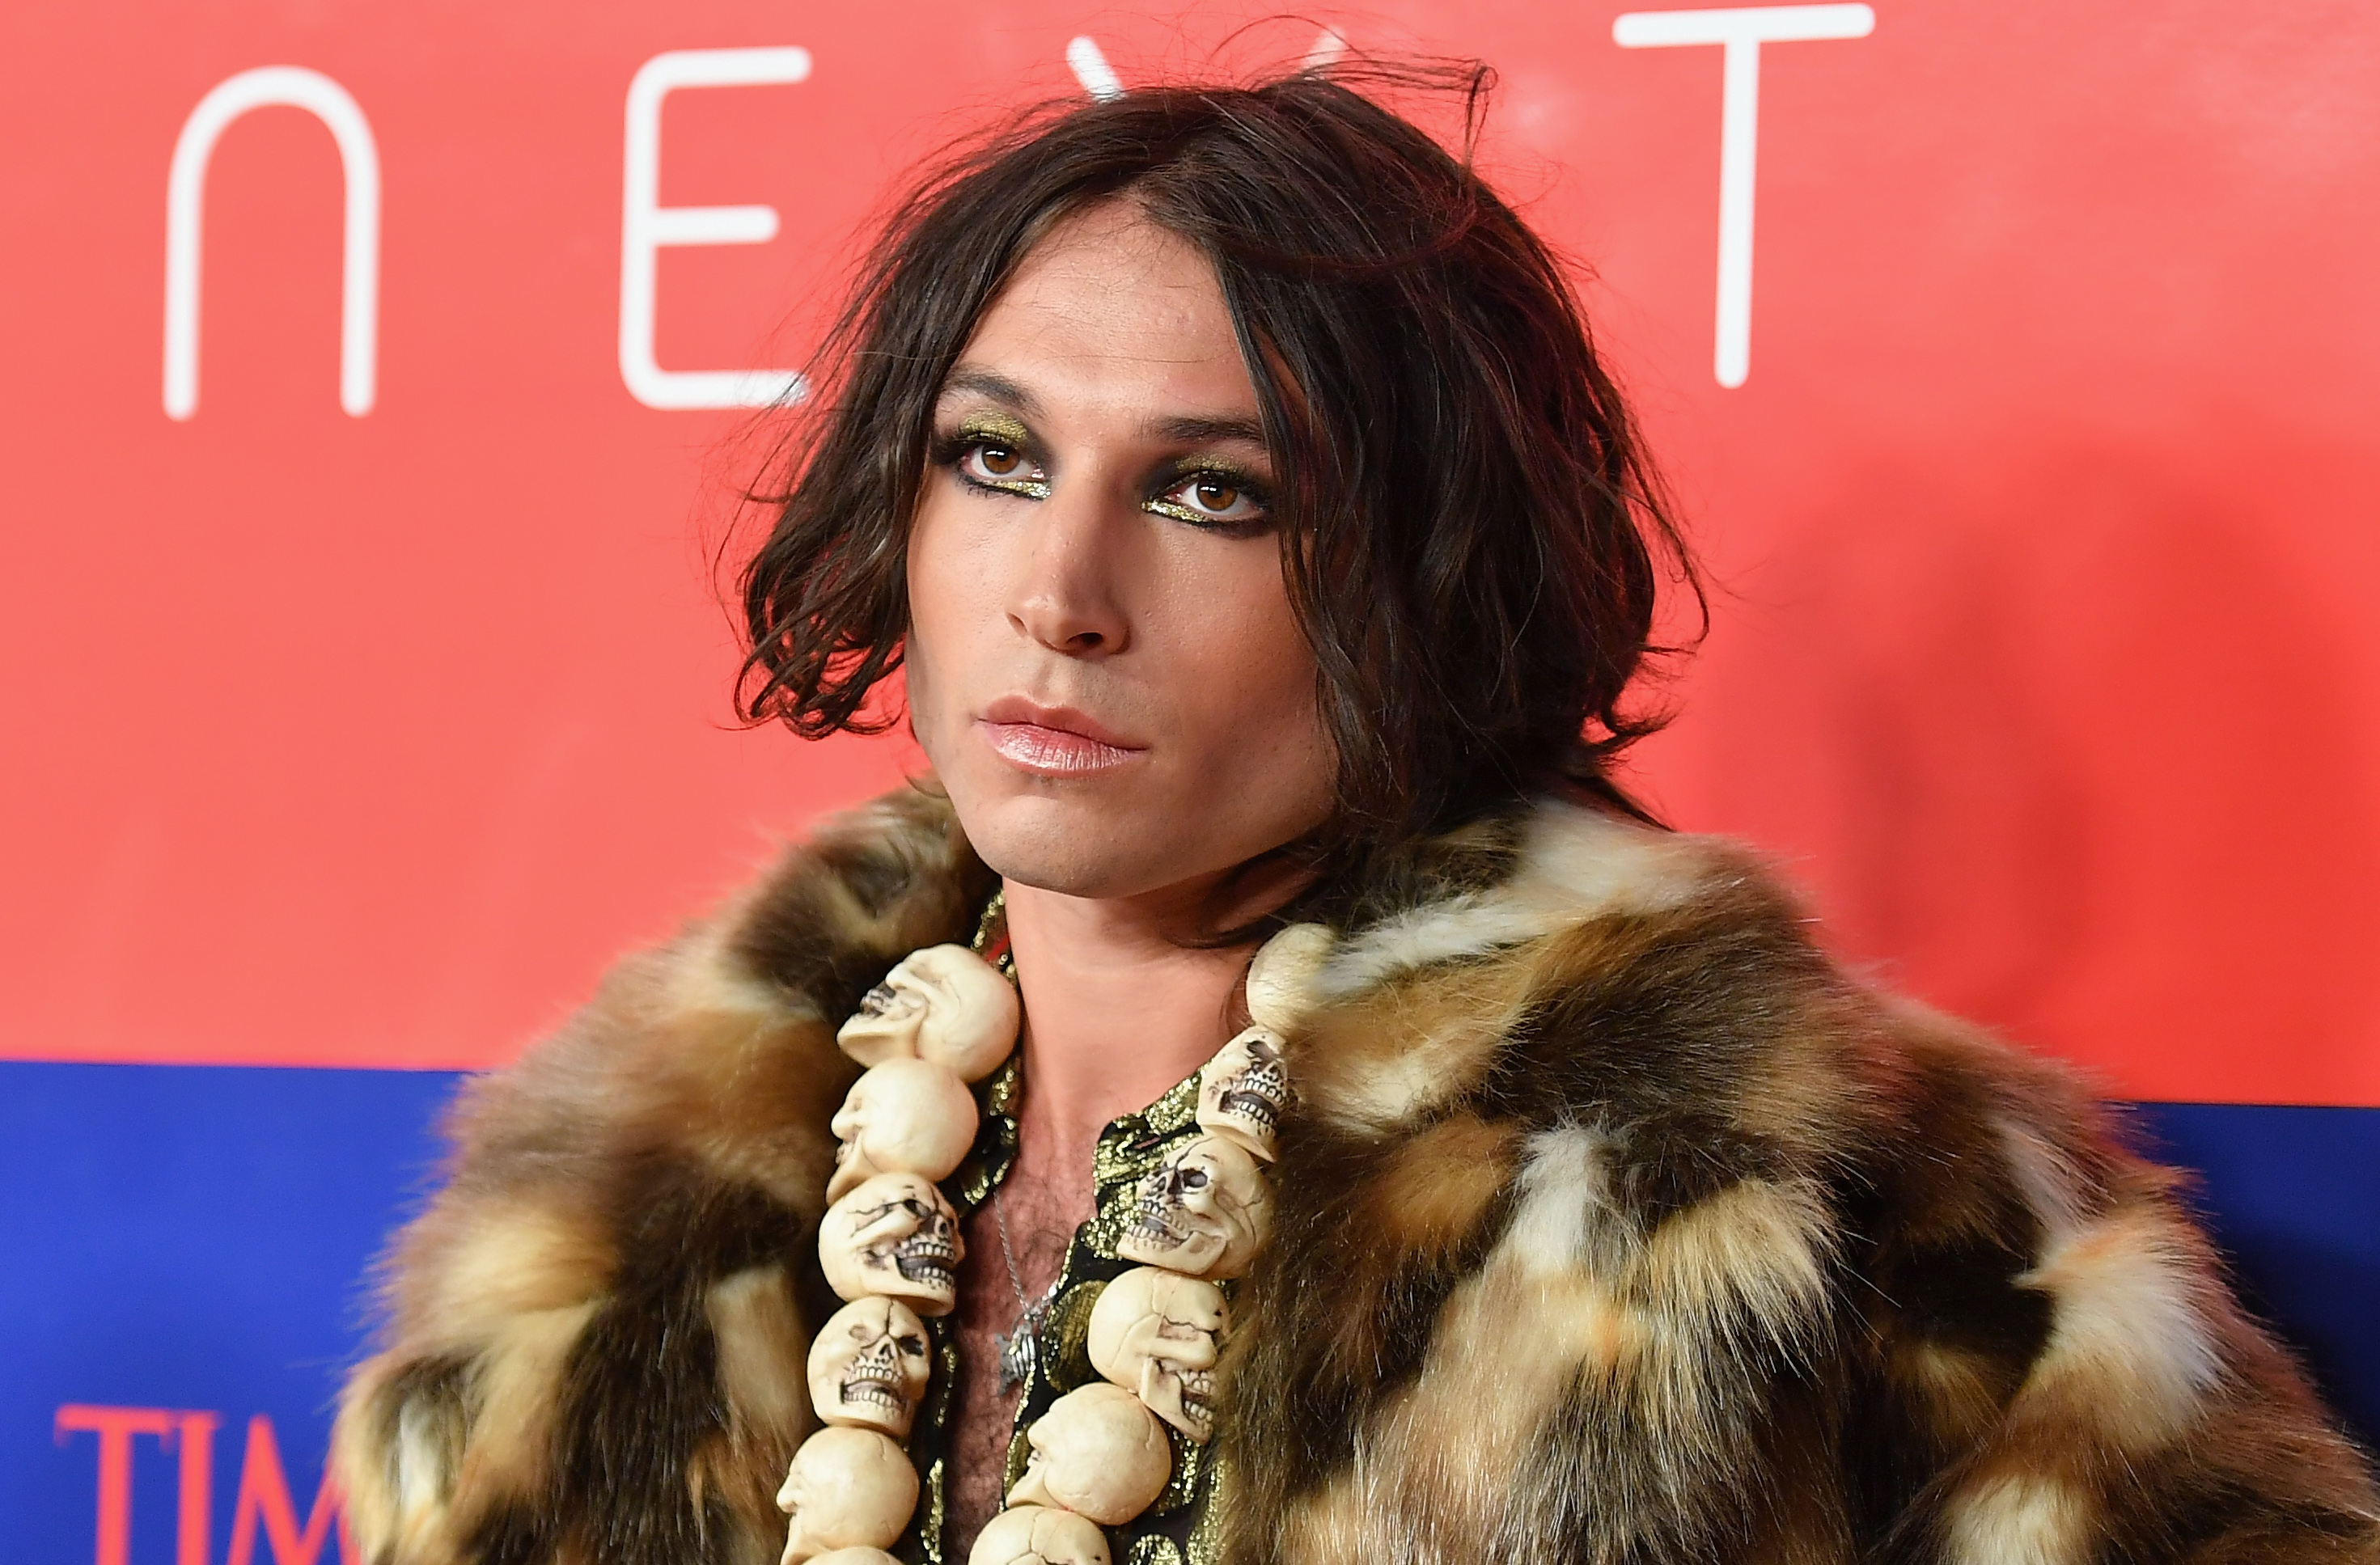 The Flash actor Ezra Miller, who was recently arrested in Hawaii, attends the Time 100 Next gala in New York City